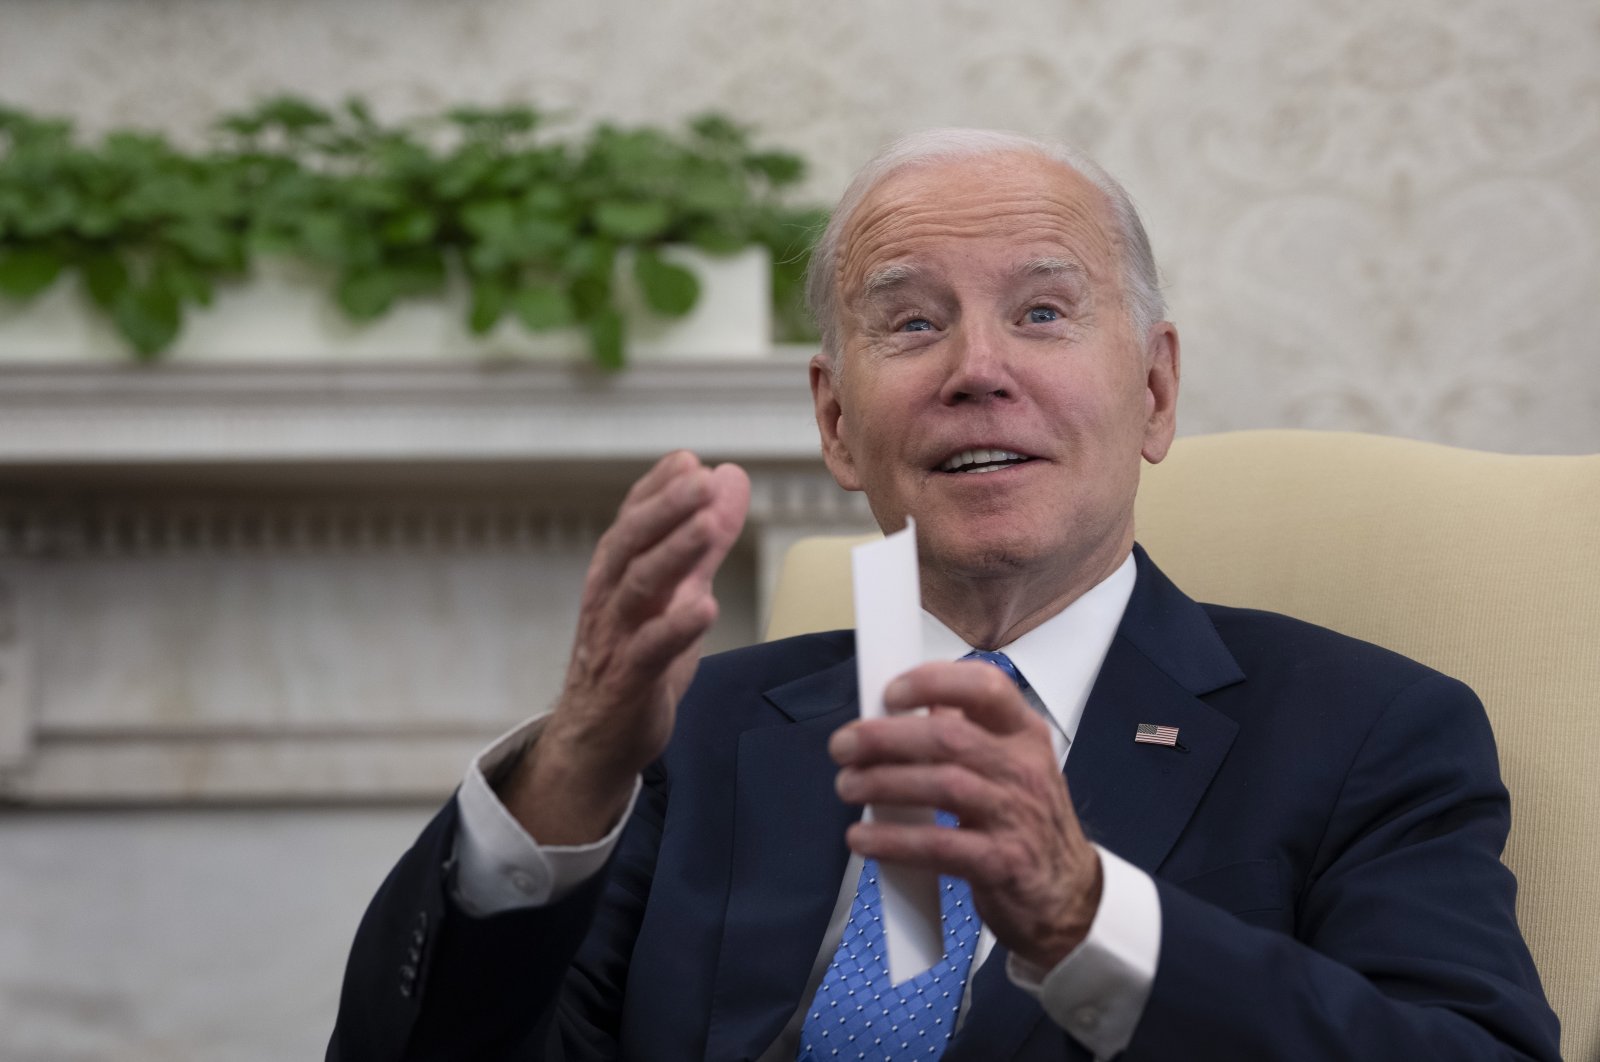 80-year-old Biden launches 2024 presidential reelection bid